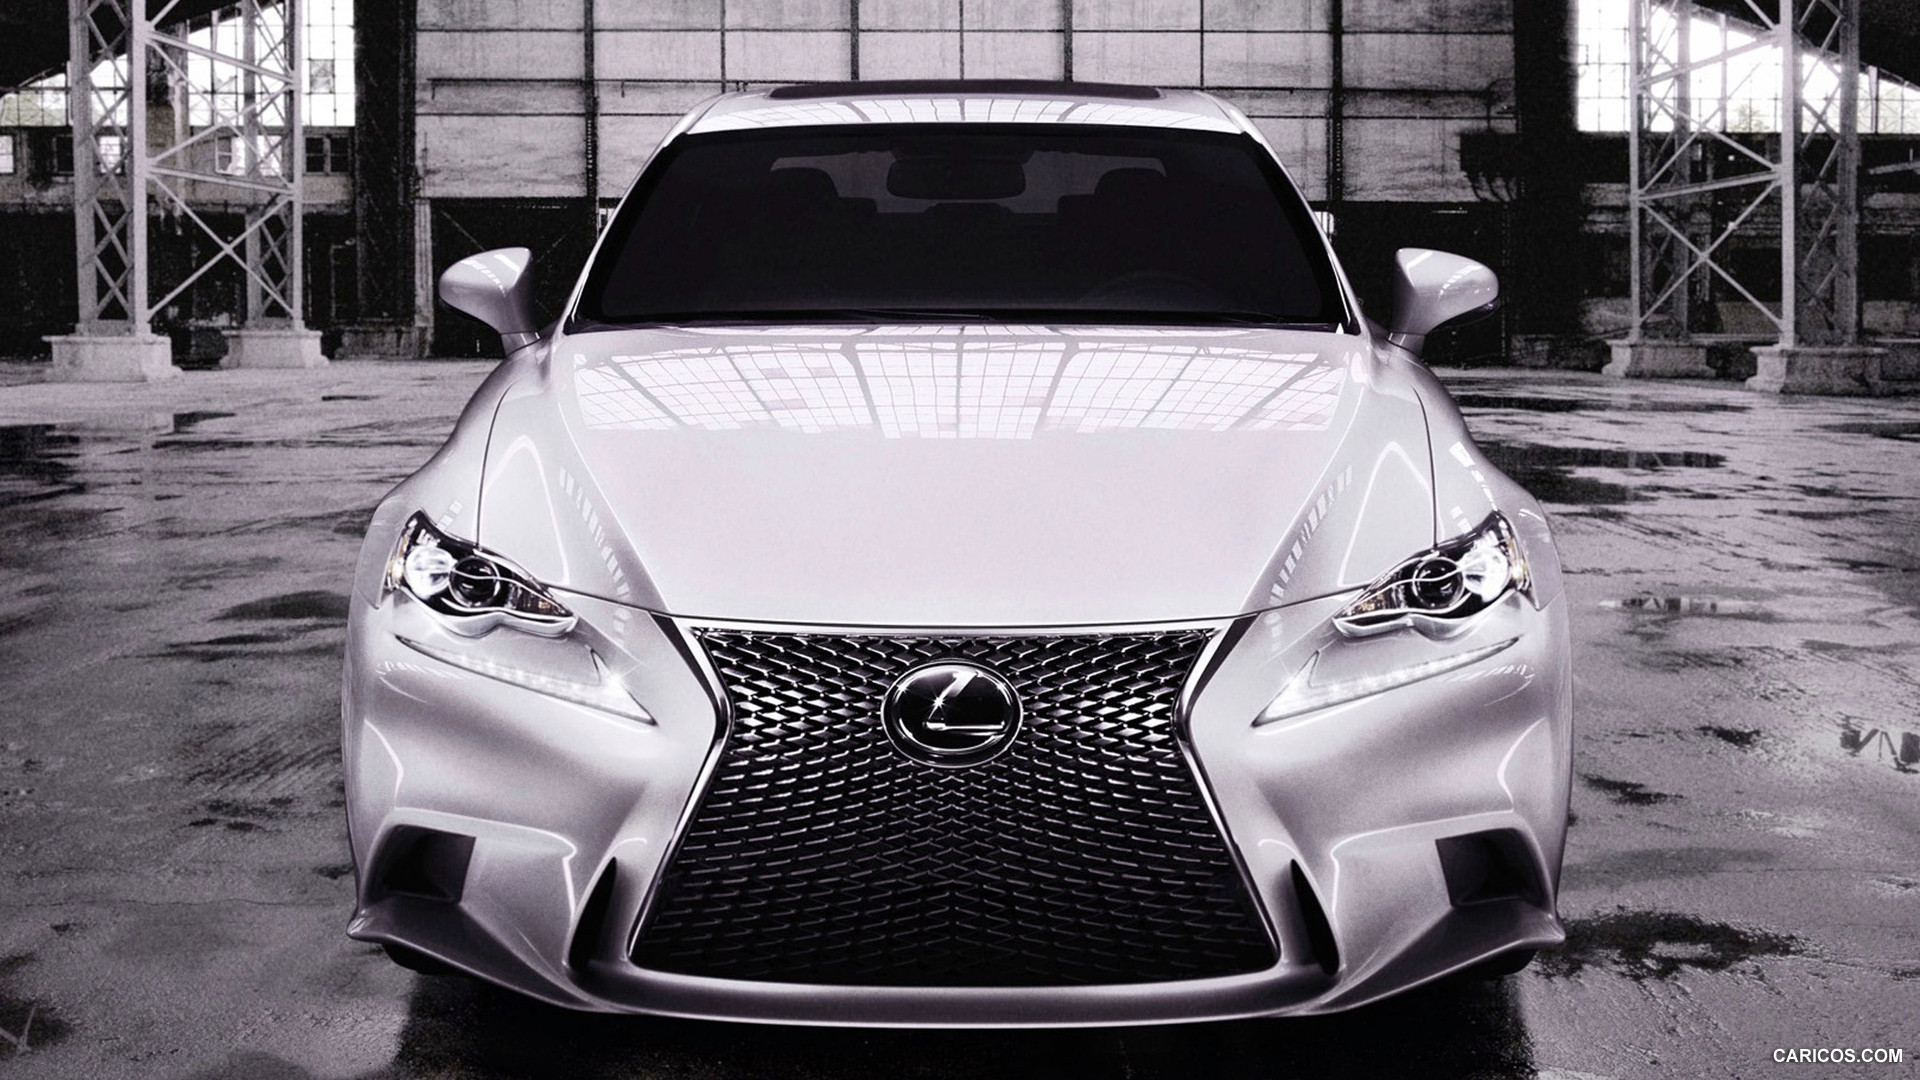 2014 Lexus IS 250 Front End View